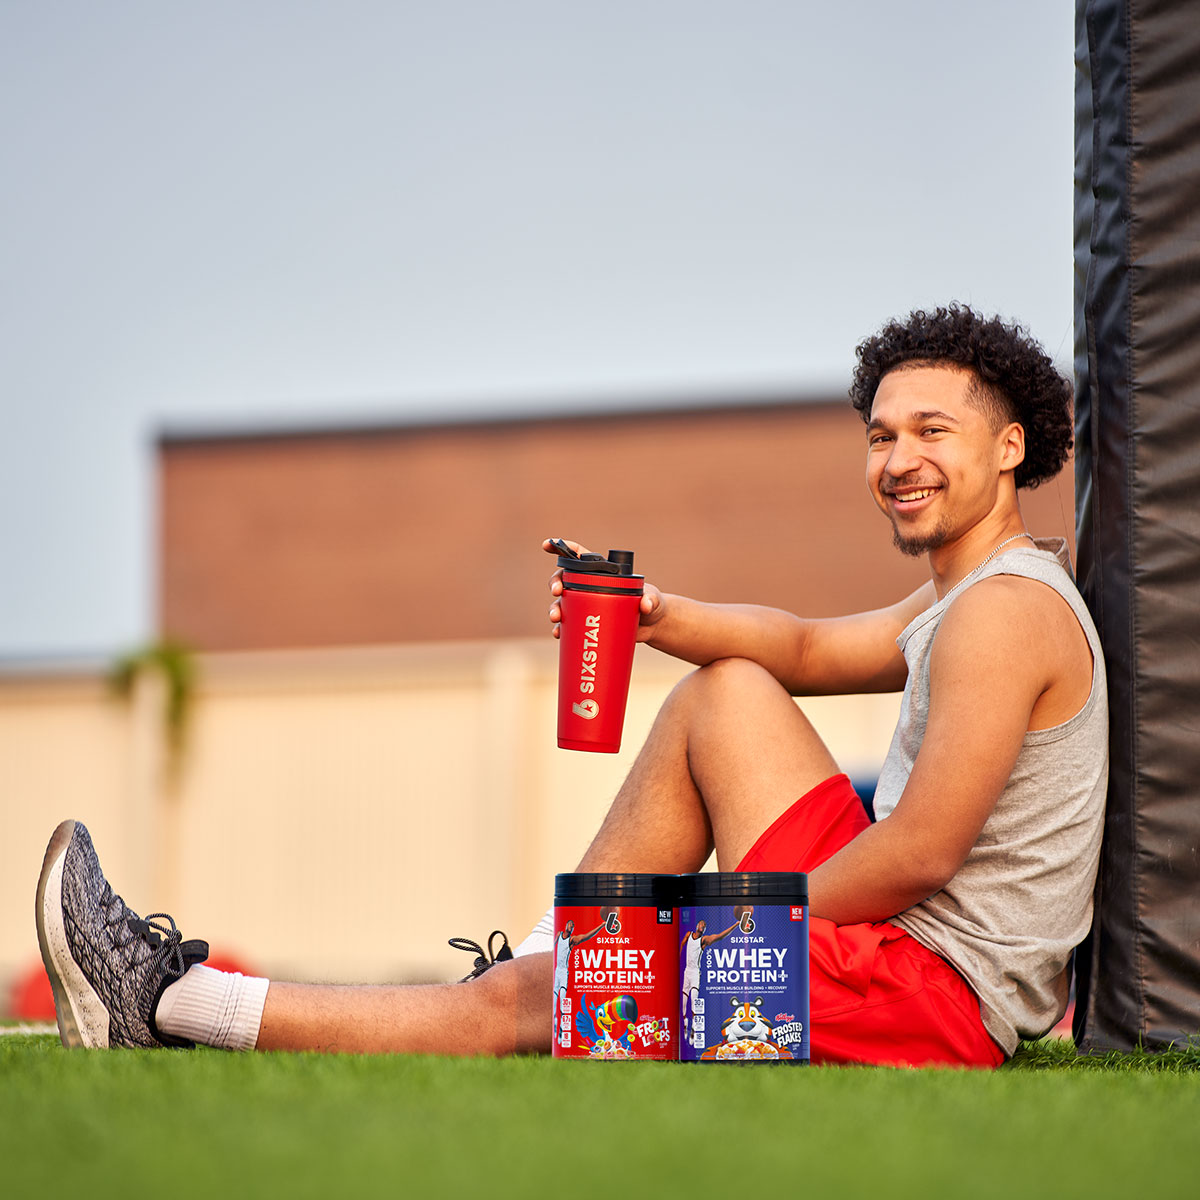 Football practice outdoors with 100% Whey Protein Plus Kellogg's Froot Loops®